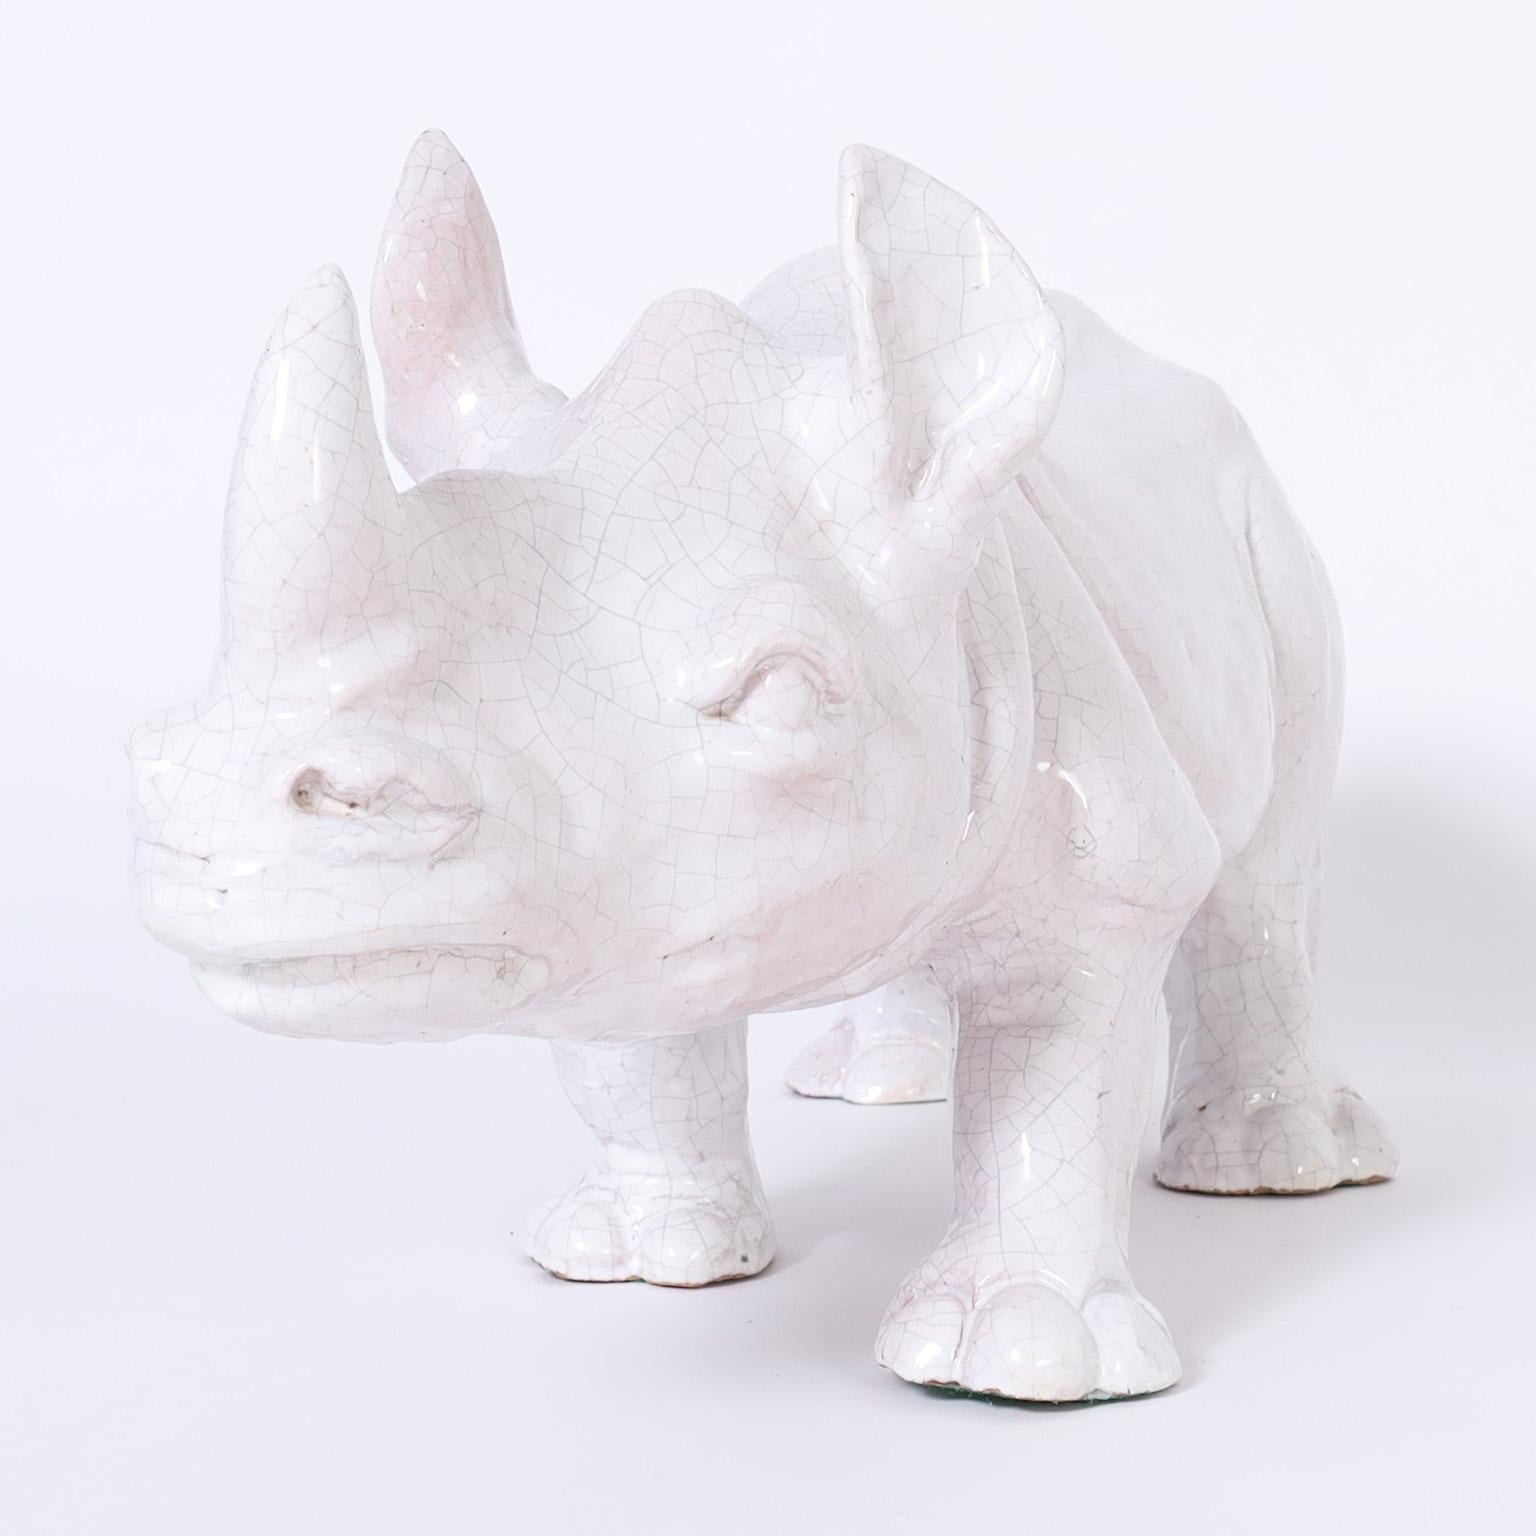 Mid century rhinoceros sculpture crafted in terra cotta with a white crackle glaze.